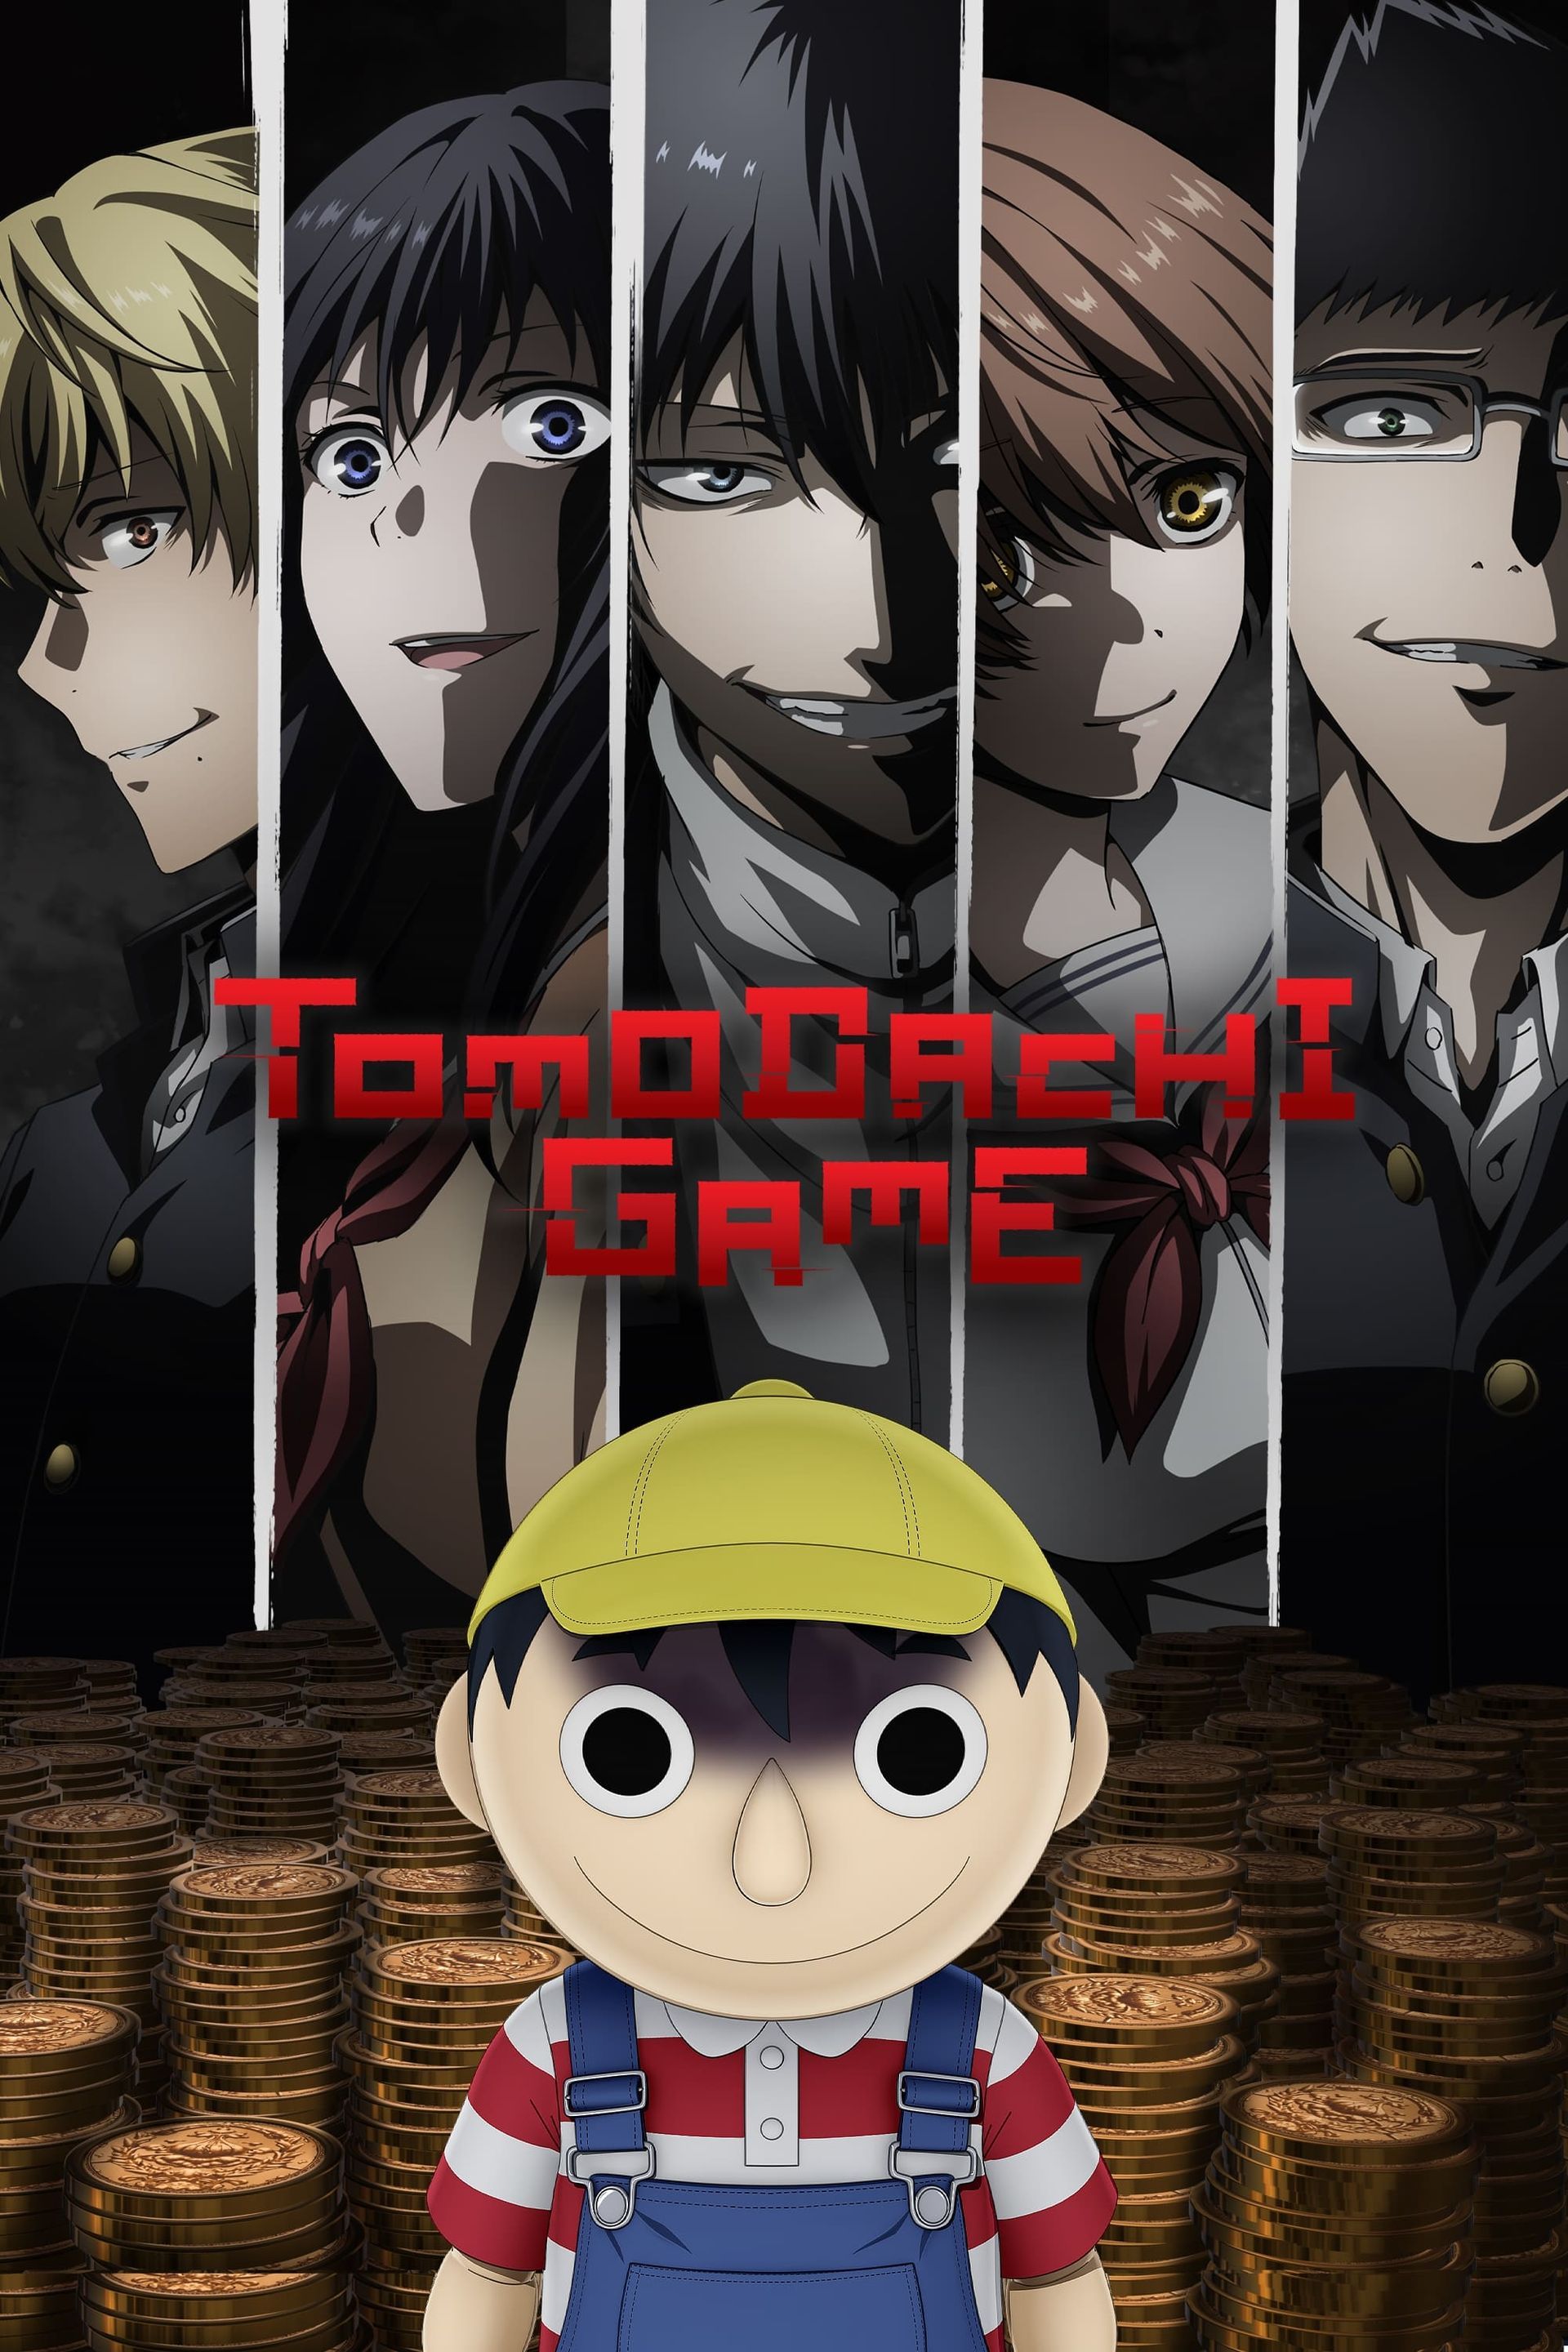 Tomodachi Game - streaming tv show online